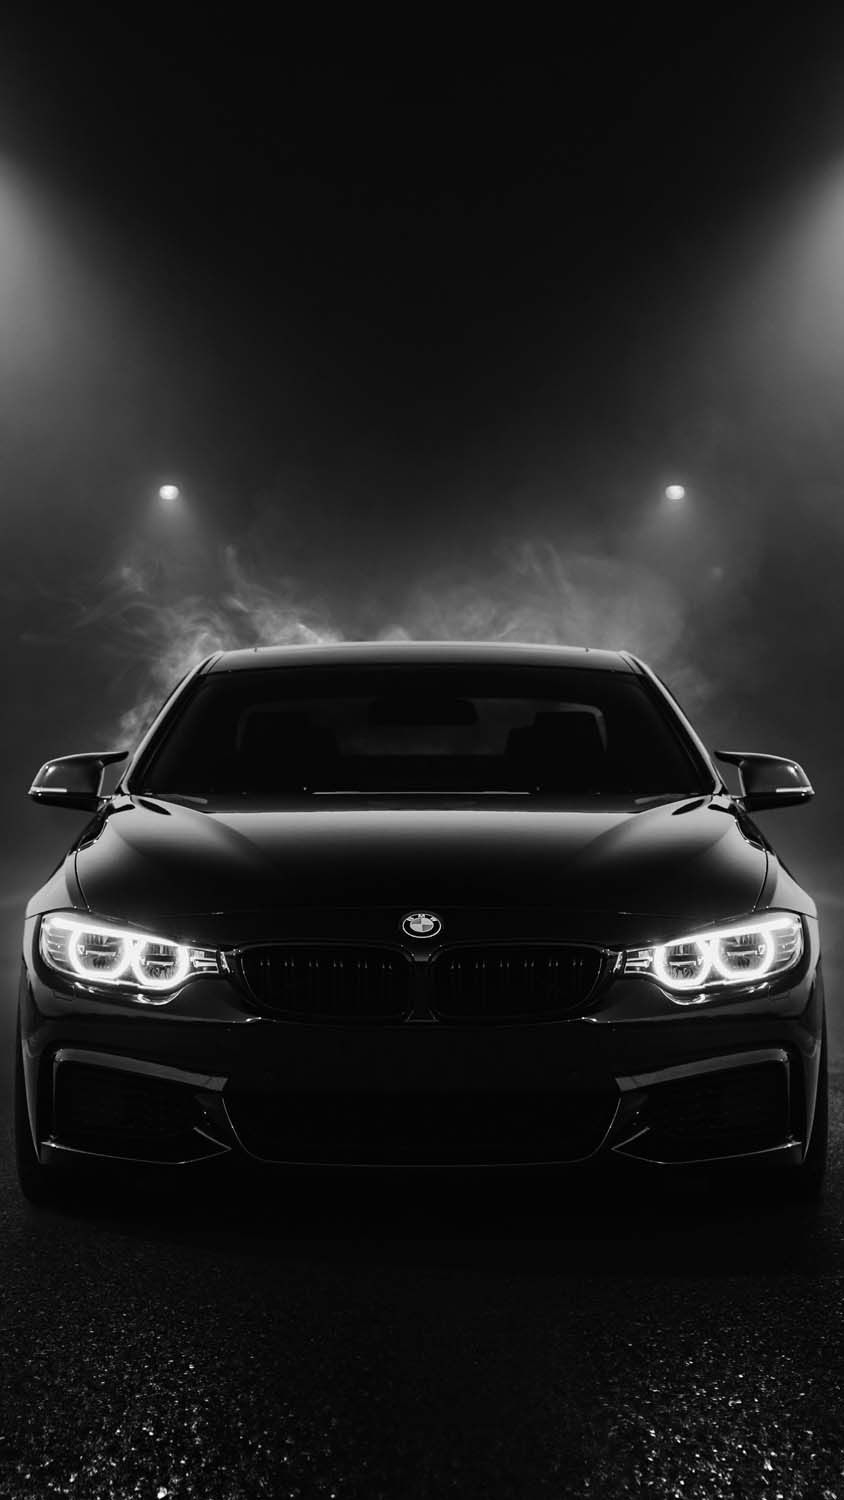 BMW Black IPhone Wallpaper HD - IPhone Wallpapers : iPhone Wallpapers